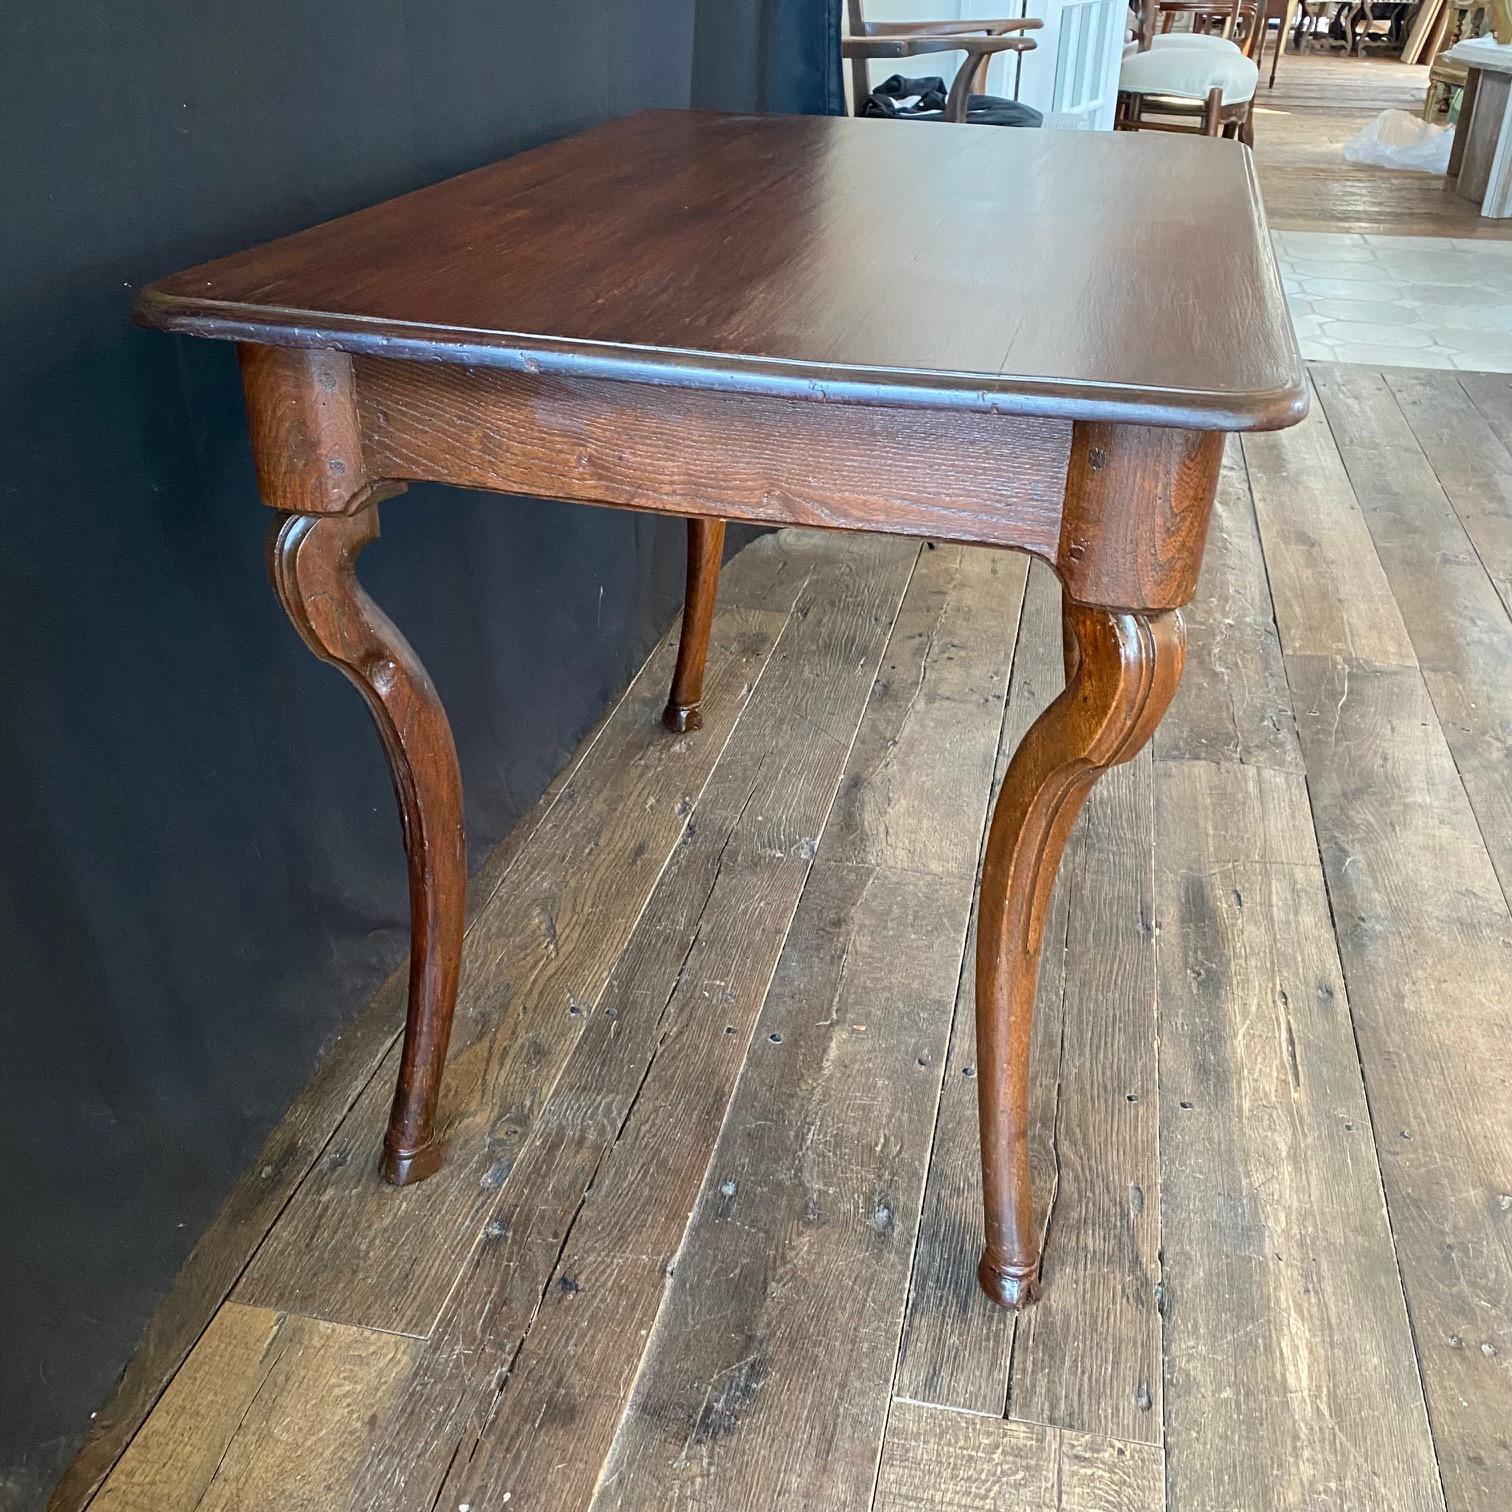 Walnut 19th Century French Country Writing Table Desk or Side Table with Hoof Feet